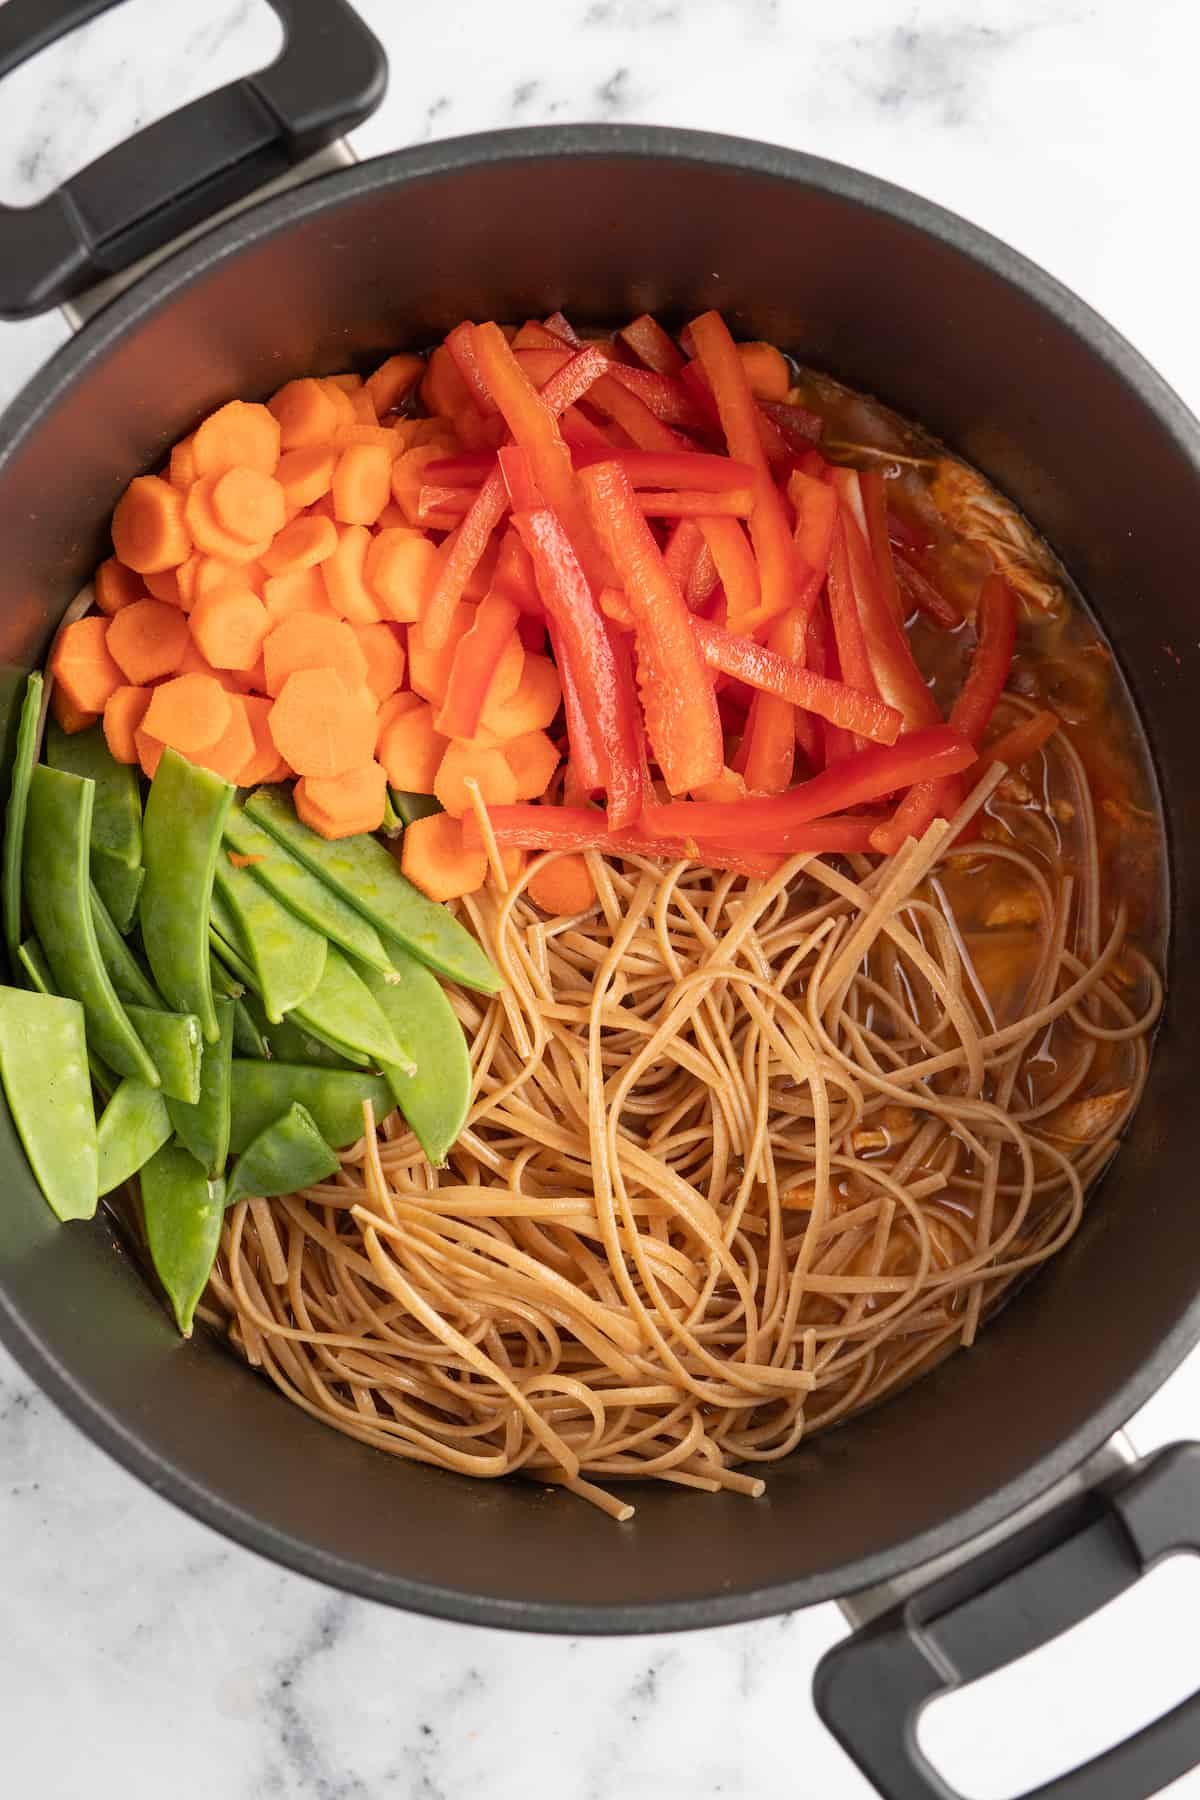 a large ، with an ،ortment of vegetables and noodles